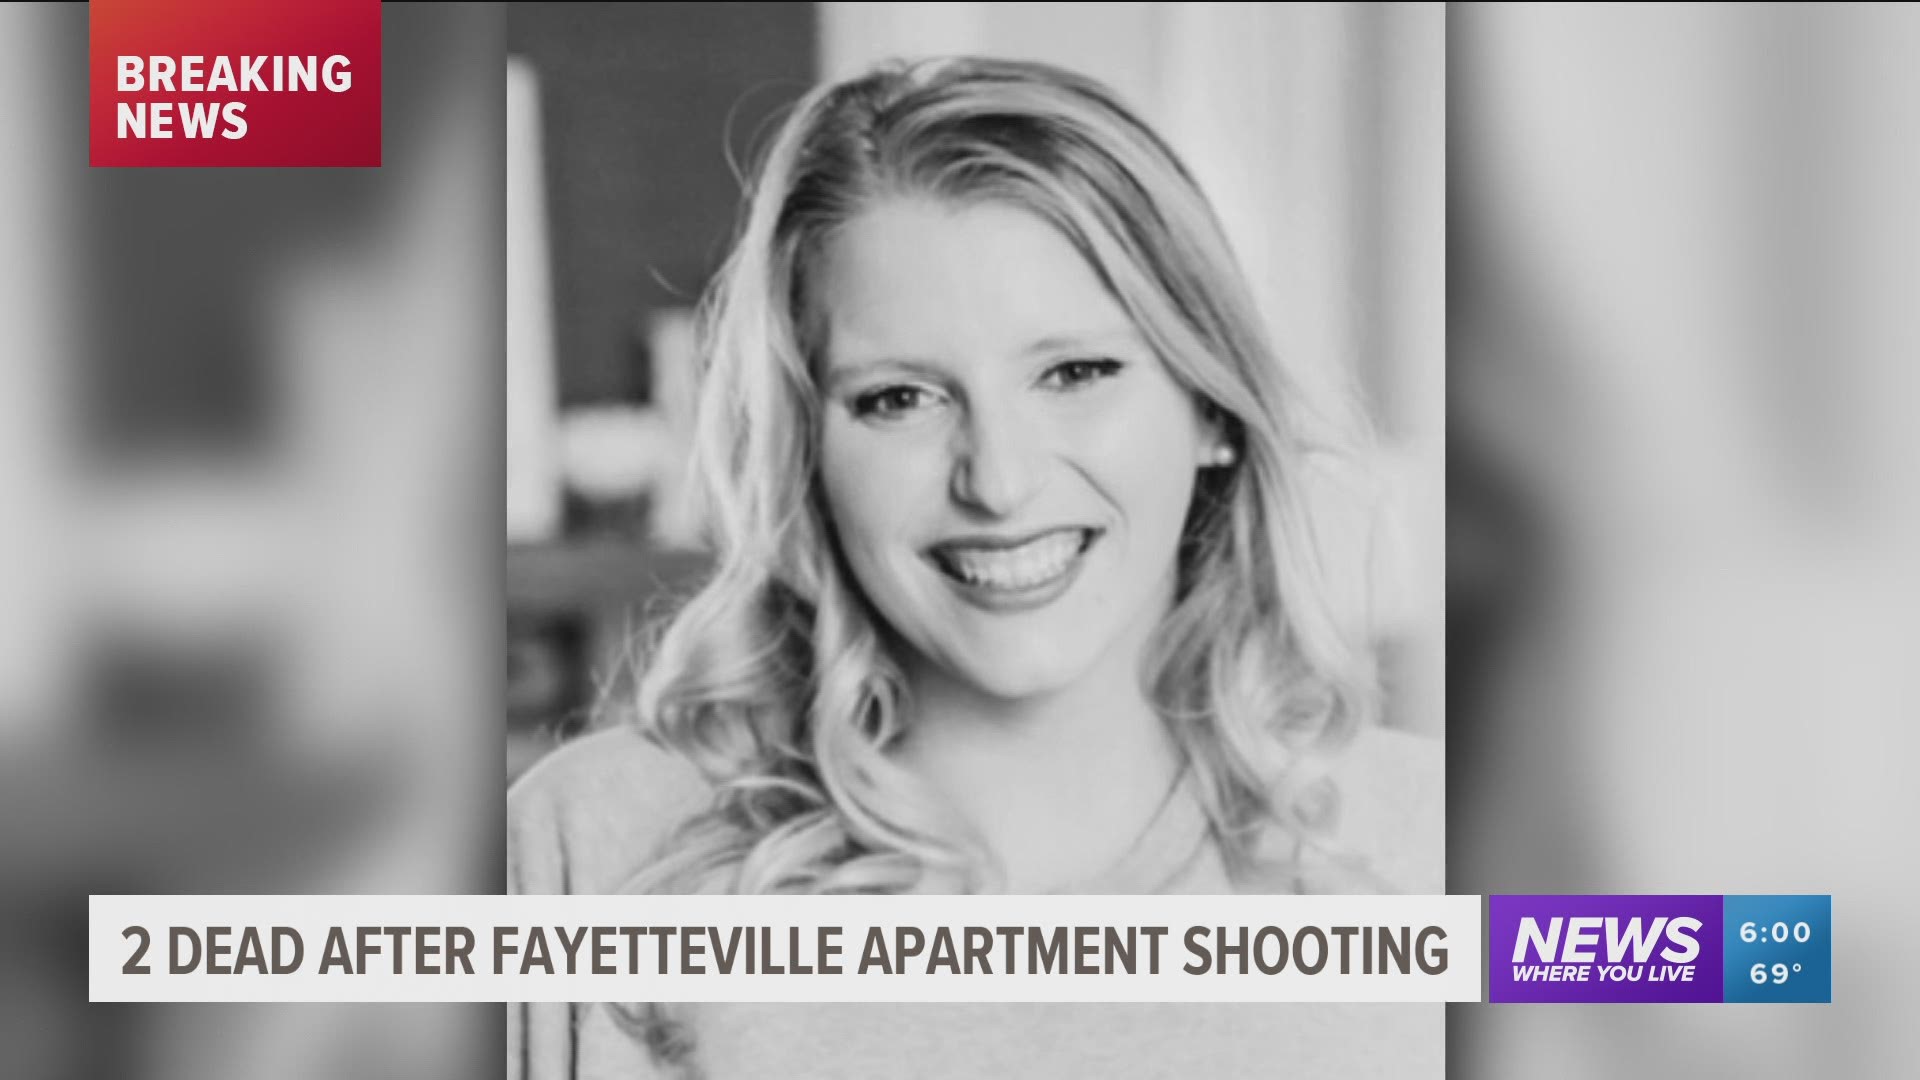 Ryu Wada, 29, and Chloe Vaught, 24, have been identified as the individuals found dead inside the apartment. https://bit.ly/3n5NpuP